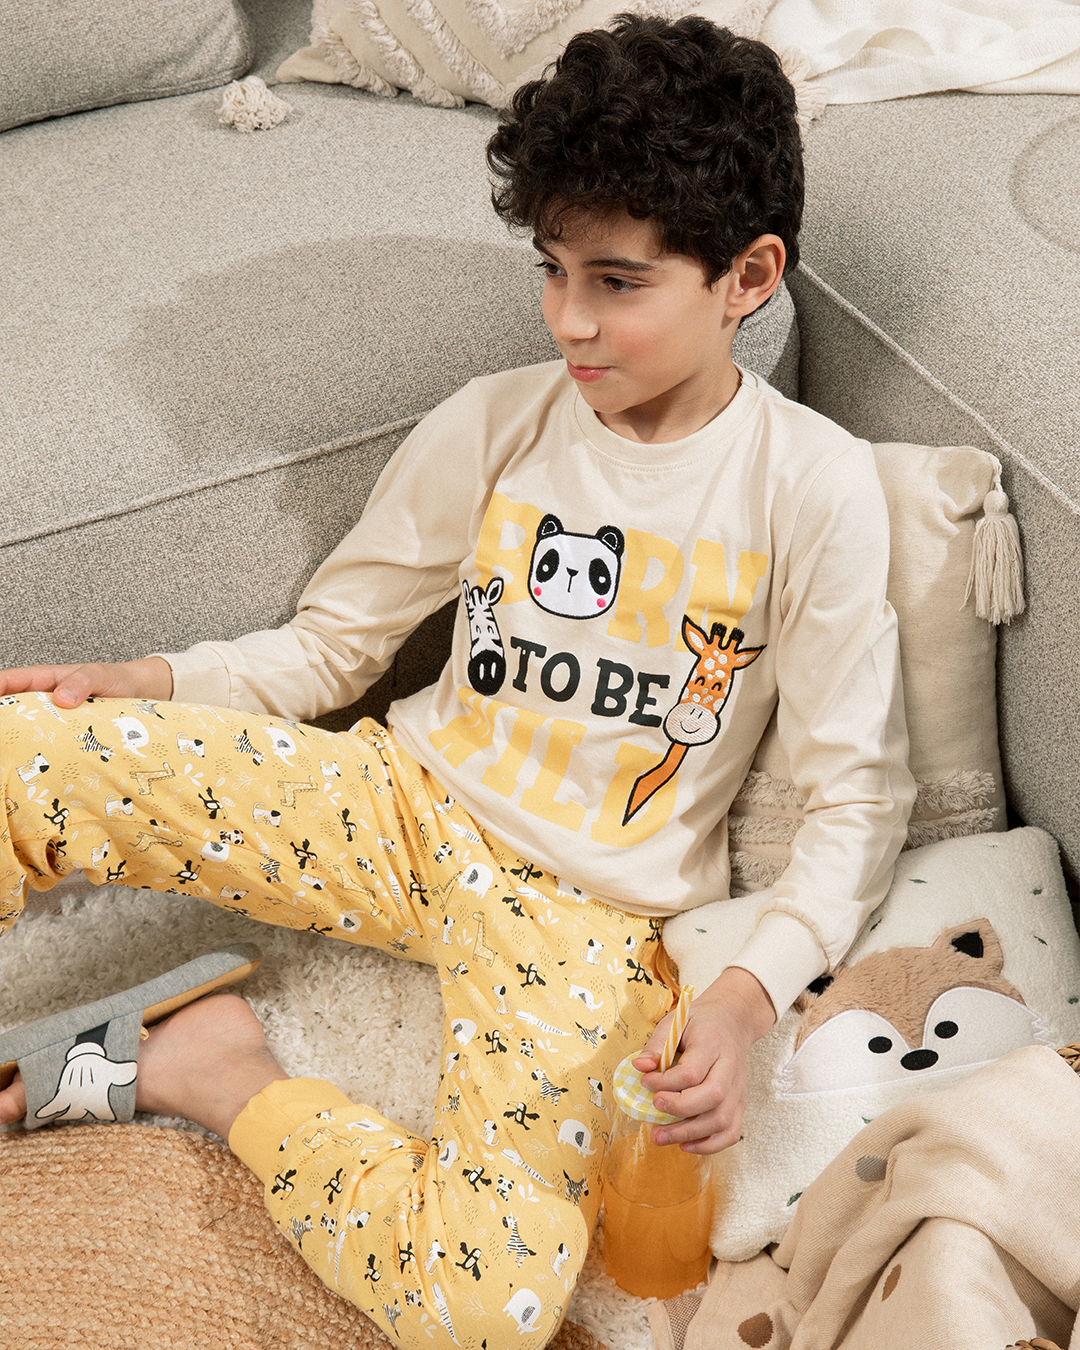 Born to be wild Children's pajamas for boys, long sleeves,% cotton *Printed cotton pants